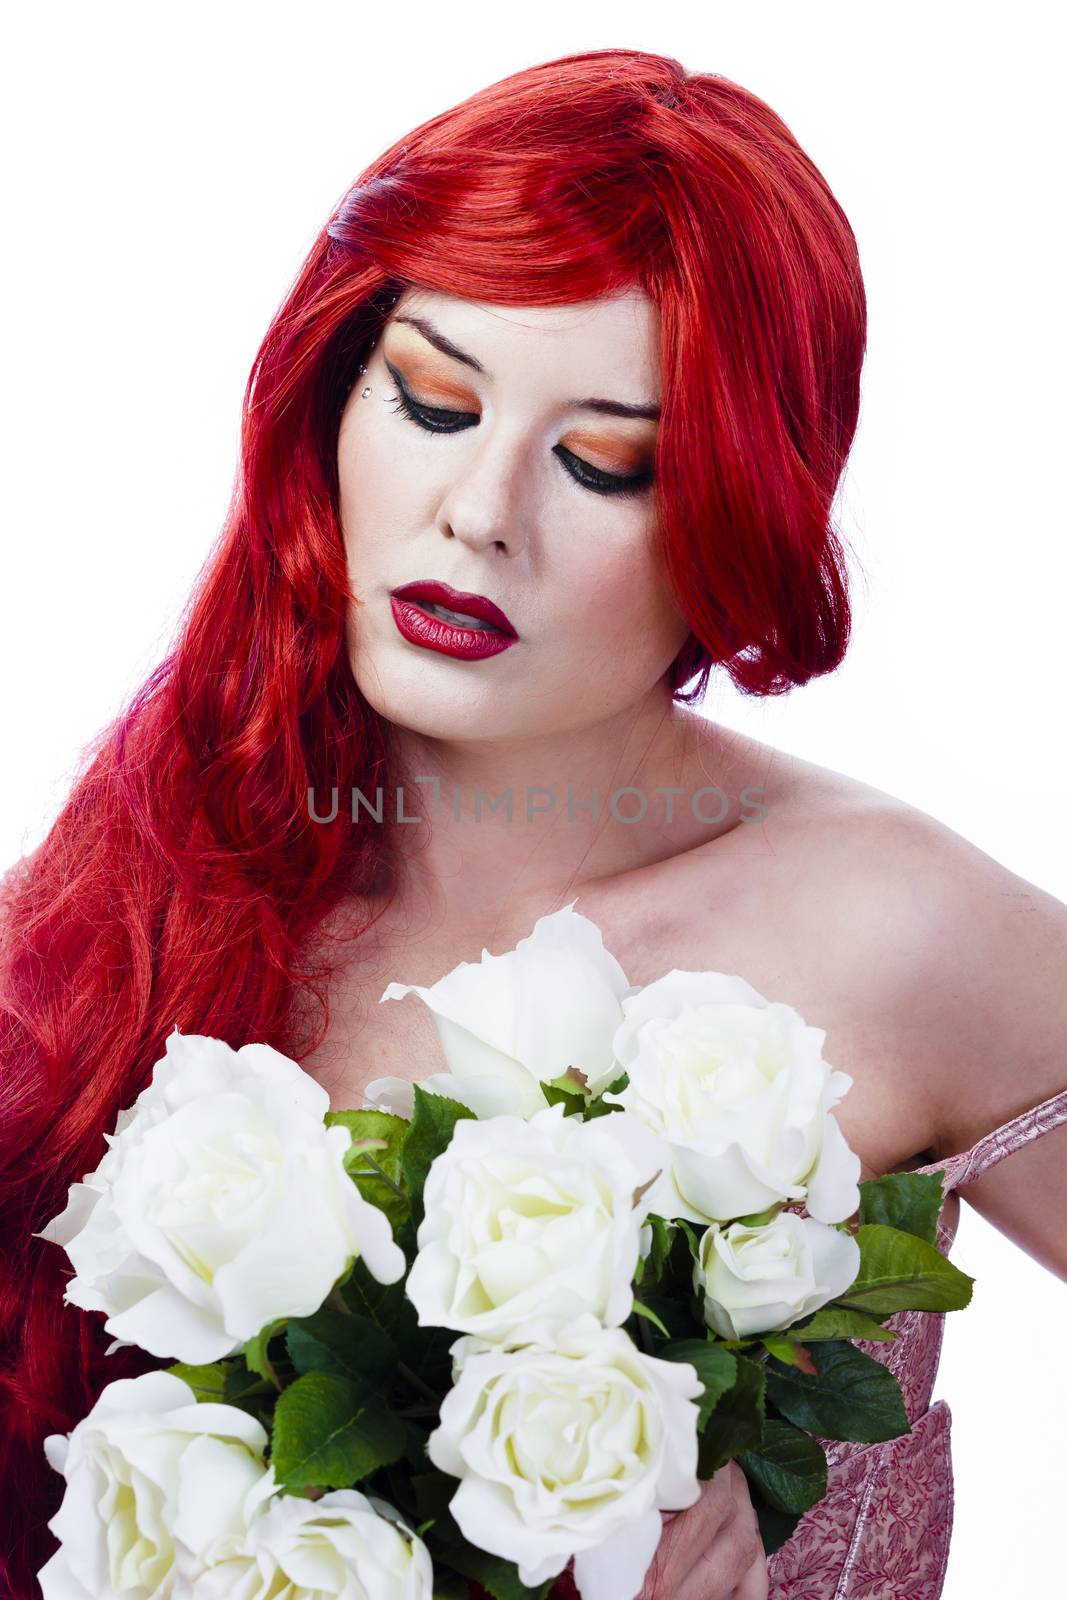 elegant and beautiful woman with red hair holding a bouquet of w by FernandoCortes